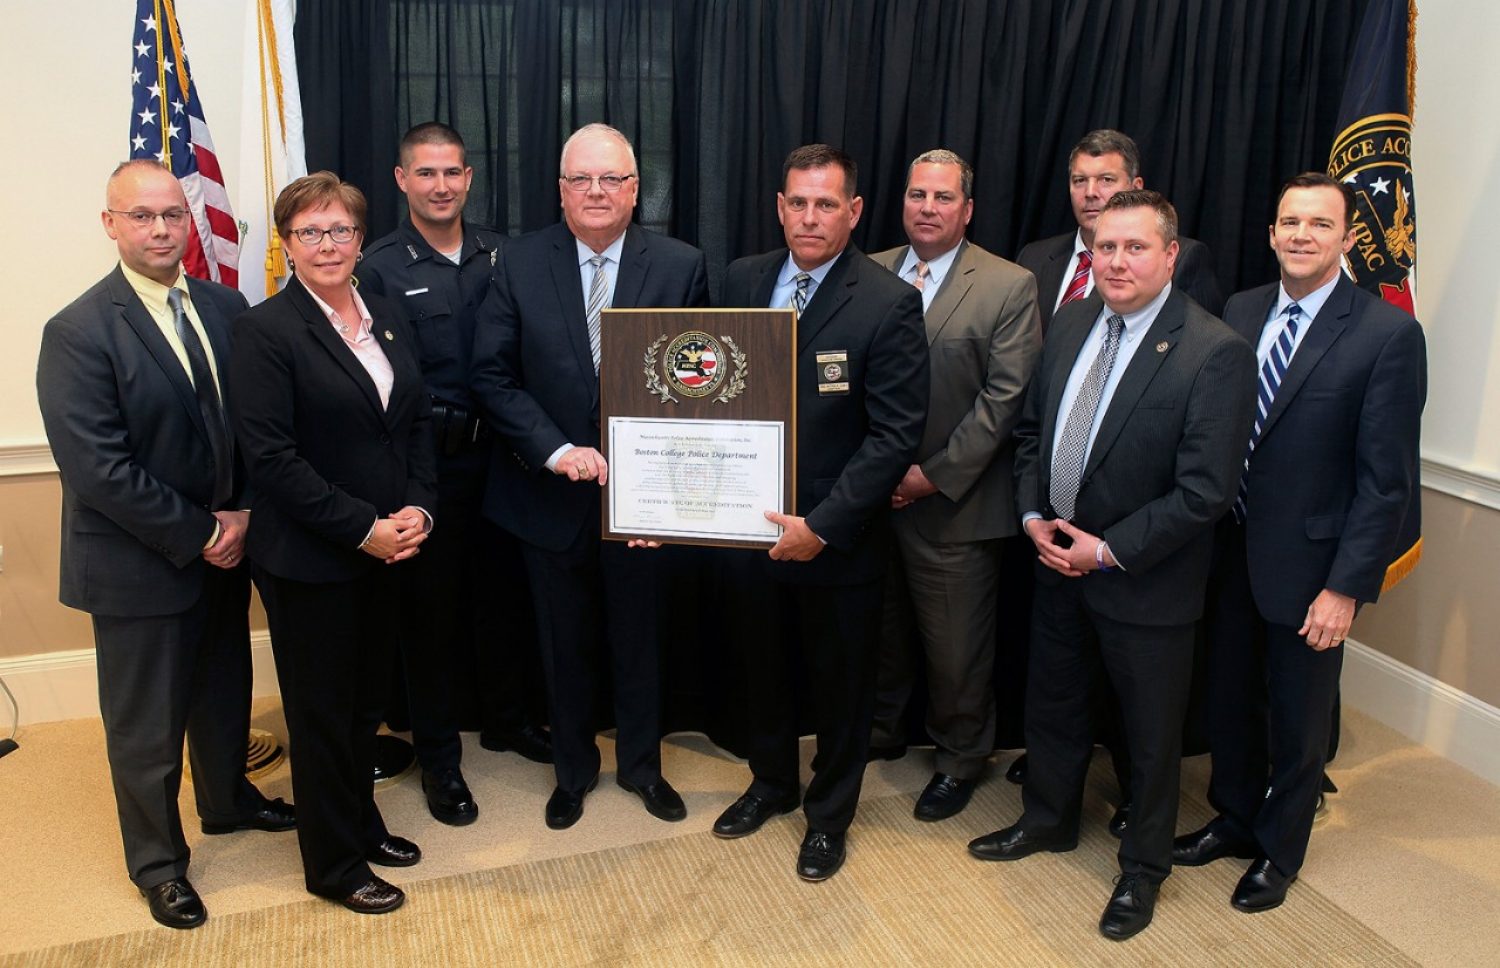 Boston College Executive Director of Public Safety and Police Chief John King, fourth from left, at a ceremony marking BC Police Department's reaccreditaiton. From left, Massachusetts Police Accreditation Commission Vice President Russ Stevens; BCPD Lieutenant and Accreditation Manager Laurene Spiess; BCPD Officer and Accreditation Assessor Robert Wayne; MPAC President Matt Clancy; BC Associate Director of Public Safety and Deputy Chief Tom Atkinson; BC Detective Lieutenant David Flaherty; BCPD Operations Lieutenant Jeff Postell, and BC Financial Vice President and Treasurer John Burke.